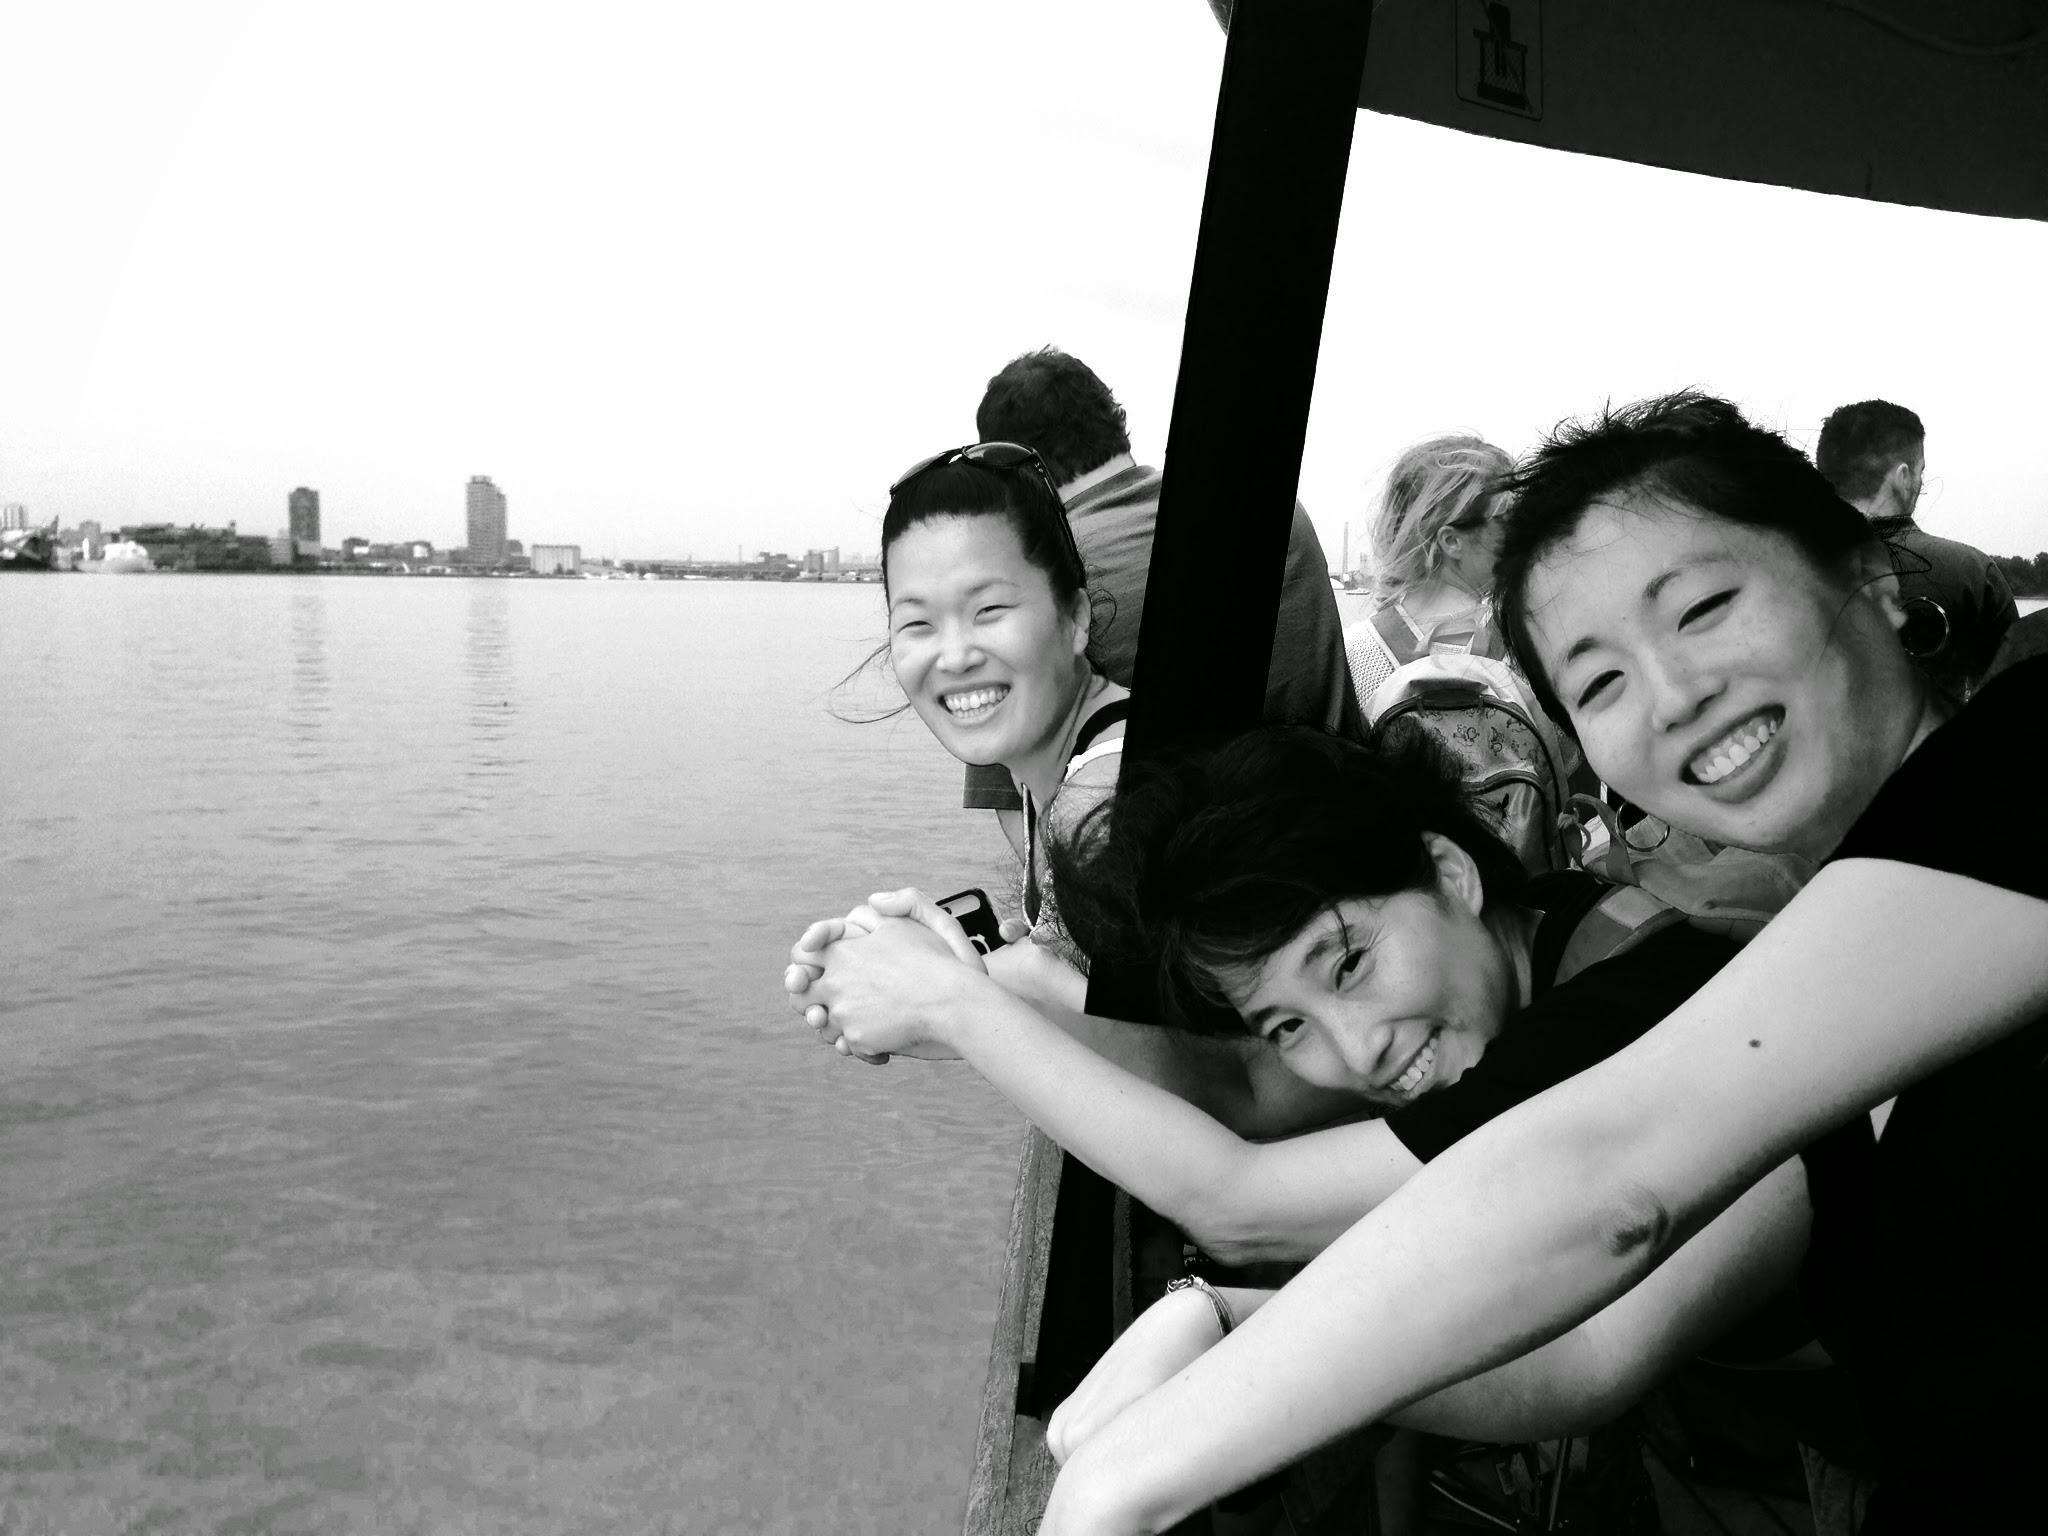 Three Korean women on a boat, looking into the camera, smiling. Hyun is in the middle.